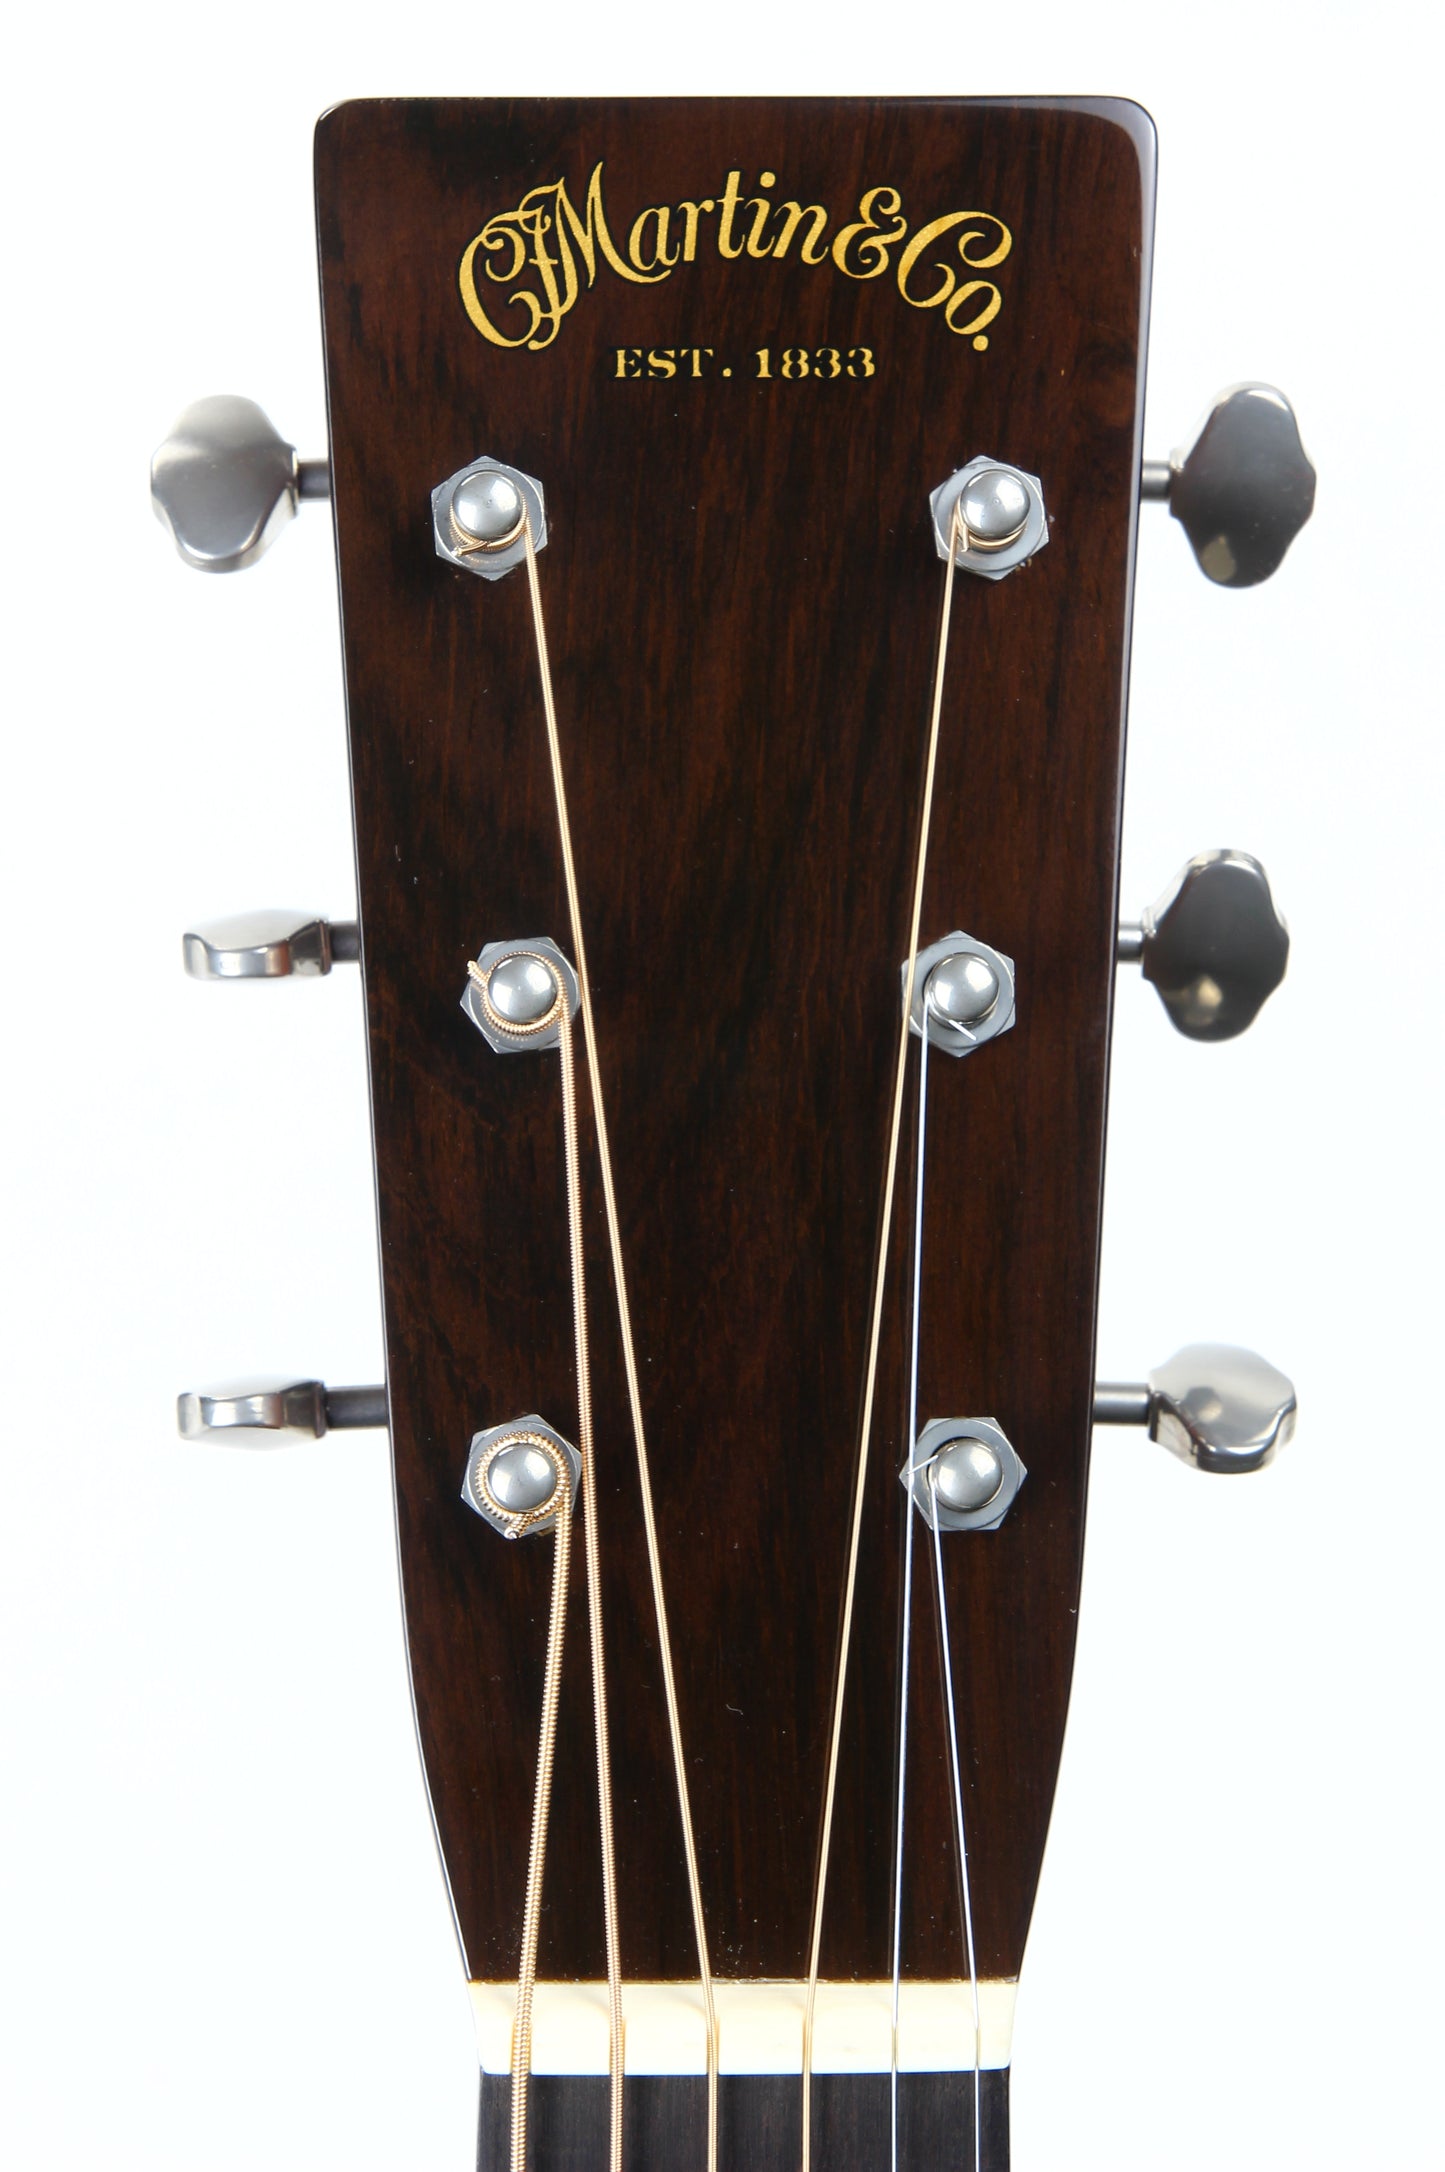 2007 Martin D-28 Authentic 1937 BRAZILIAN ROSEWOOD --1 of 50 Made, Hide Glue, Adi Top, Limited Edition!